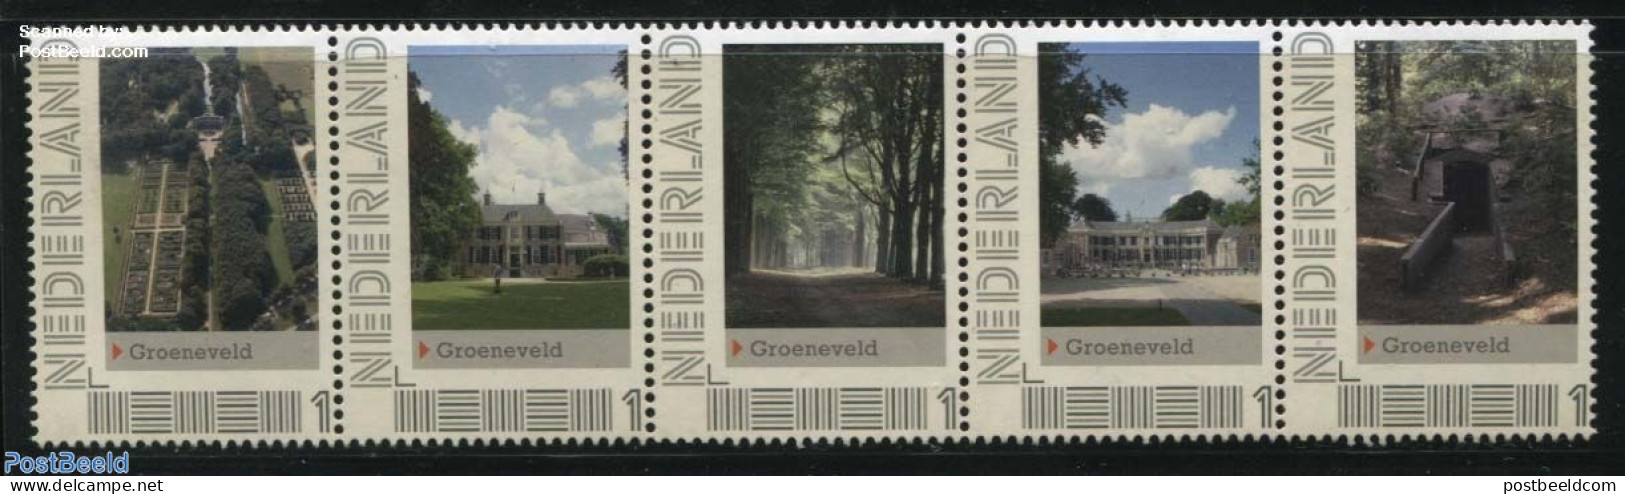 Netherlands - Personal Stamps TNT/PNL 2012 Groeneveld 5V [::::], Mint NH, Nature - Trees & Forests - Castles & Fortifi.. - Rotary, Lions Club